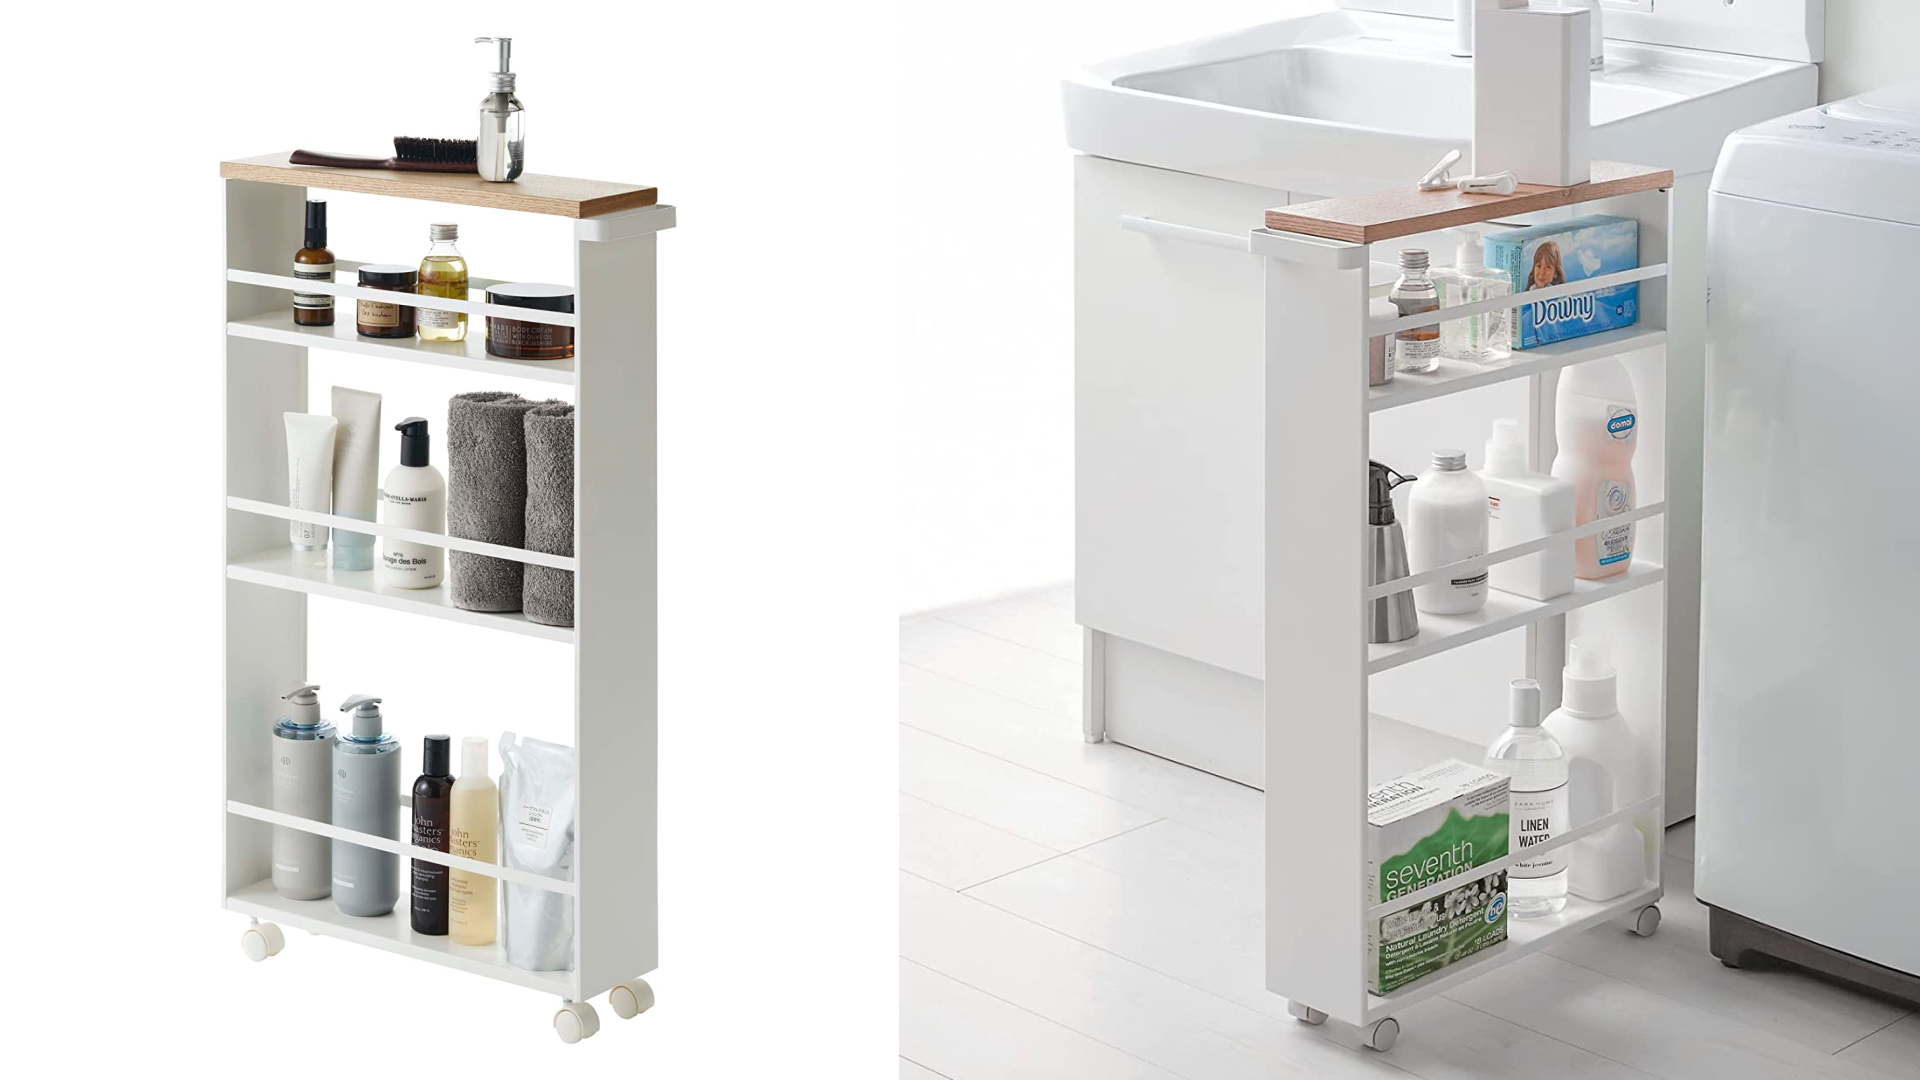 25 Bathroom Organizers Guaranteed to Help Keep Your Space Spotless